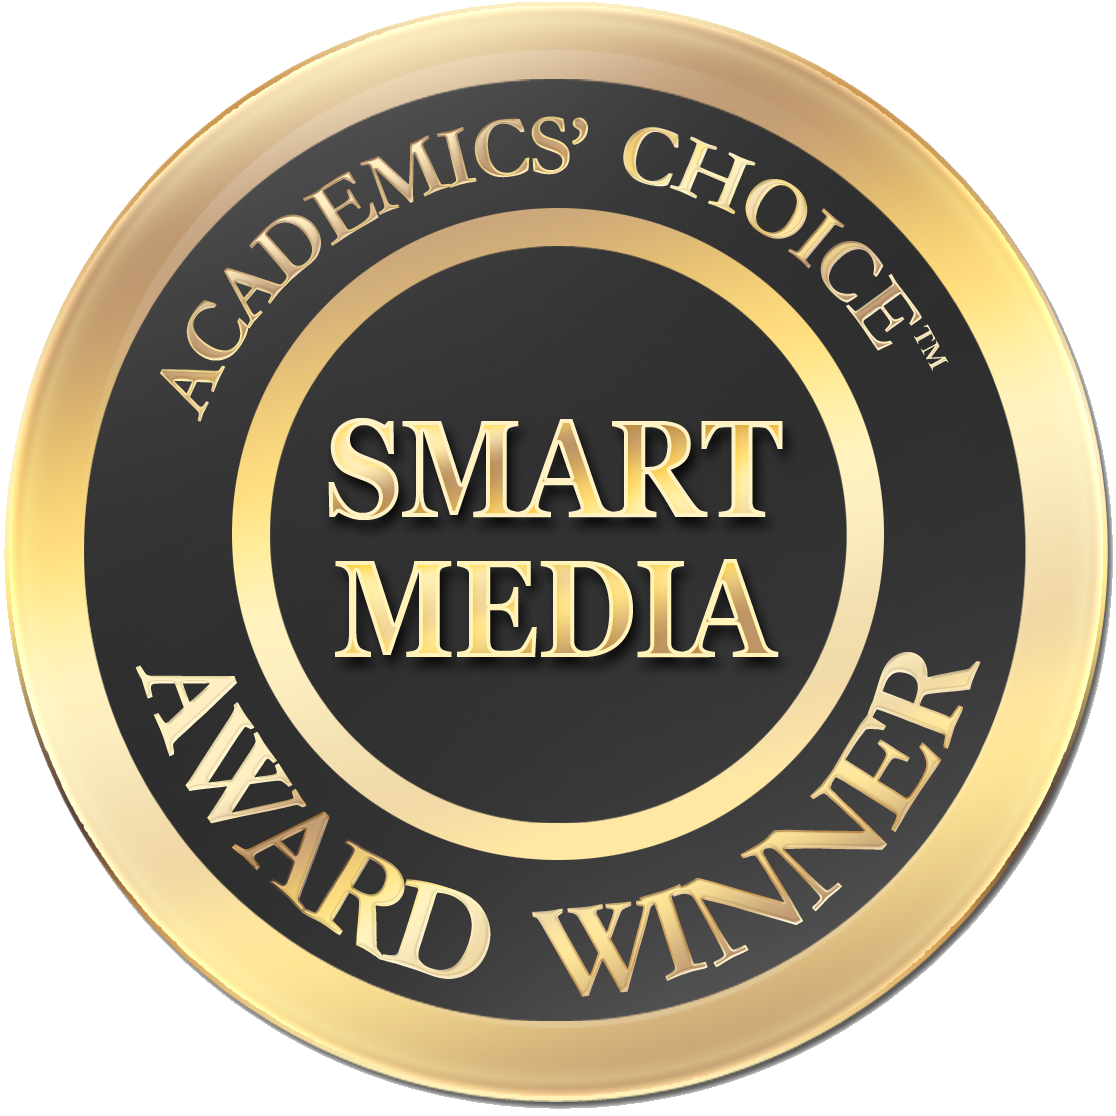 Academics' Choice™ helps consumers find exceptional brain-boosting material, bringing increased recognition to organizations that aim to stimulate cognitive development.